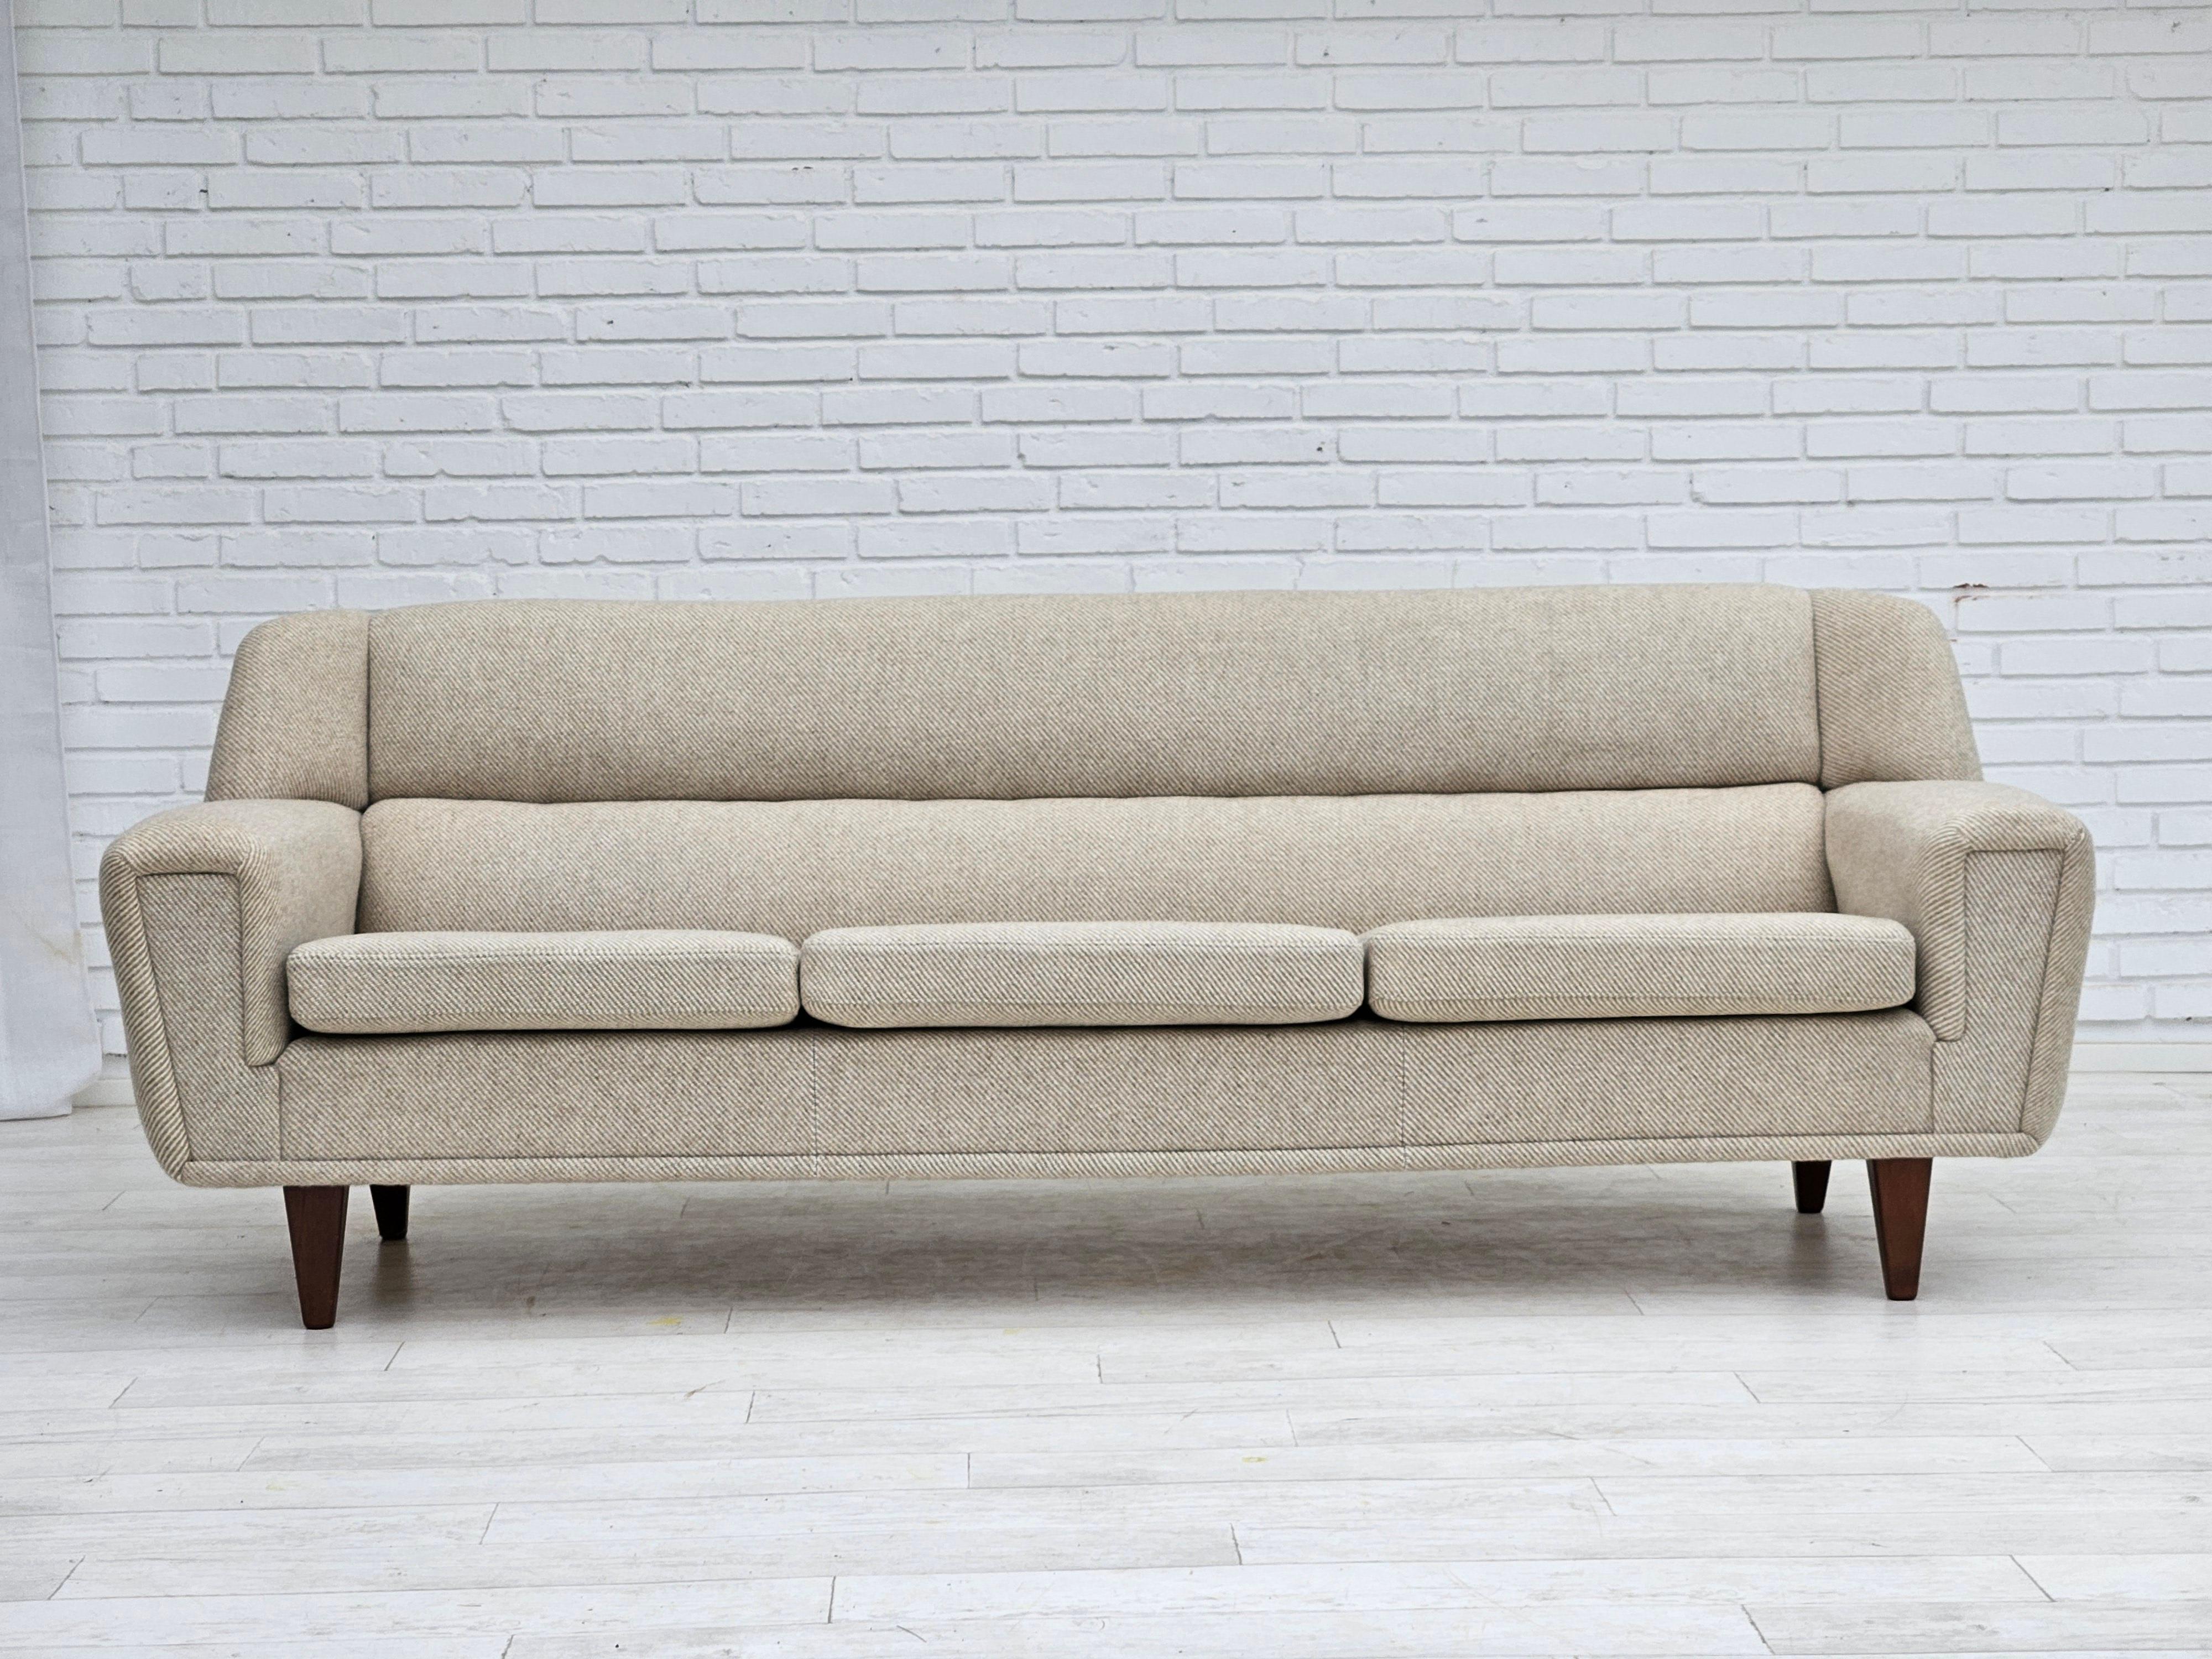 1960s, Danish design sofa by Kurt Østervig model 61. Original good condition: no smells and no stains. Furniture wool, teakwood legs. Removable seat cushions. Manufactured by Danish furniture manufacturer Rolschau Møbler in about 1960s.